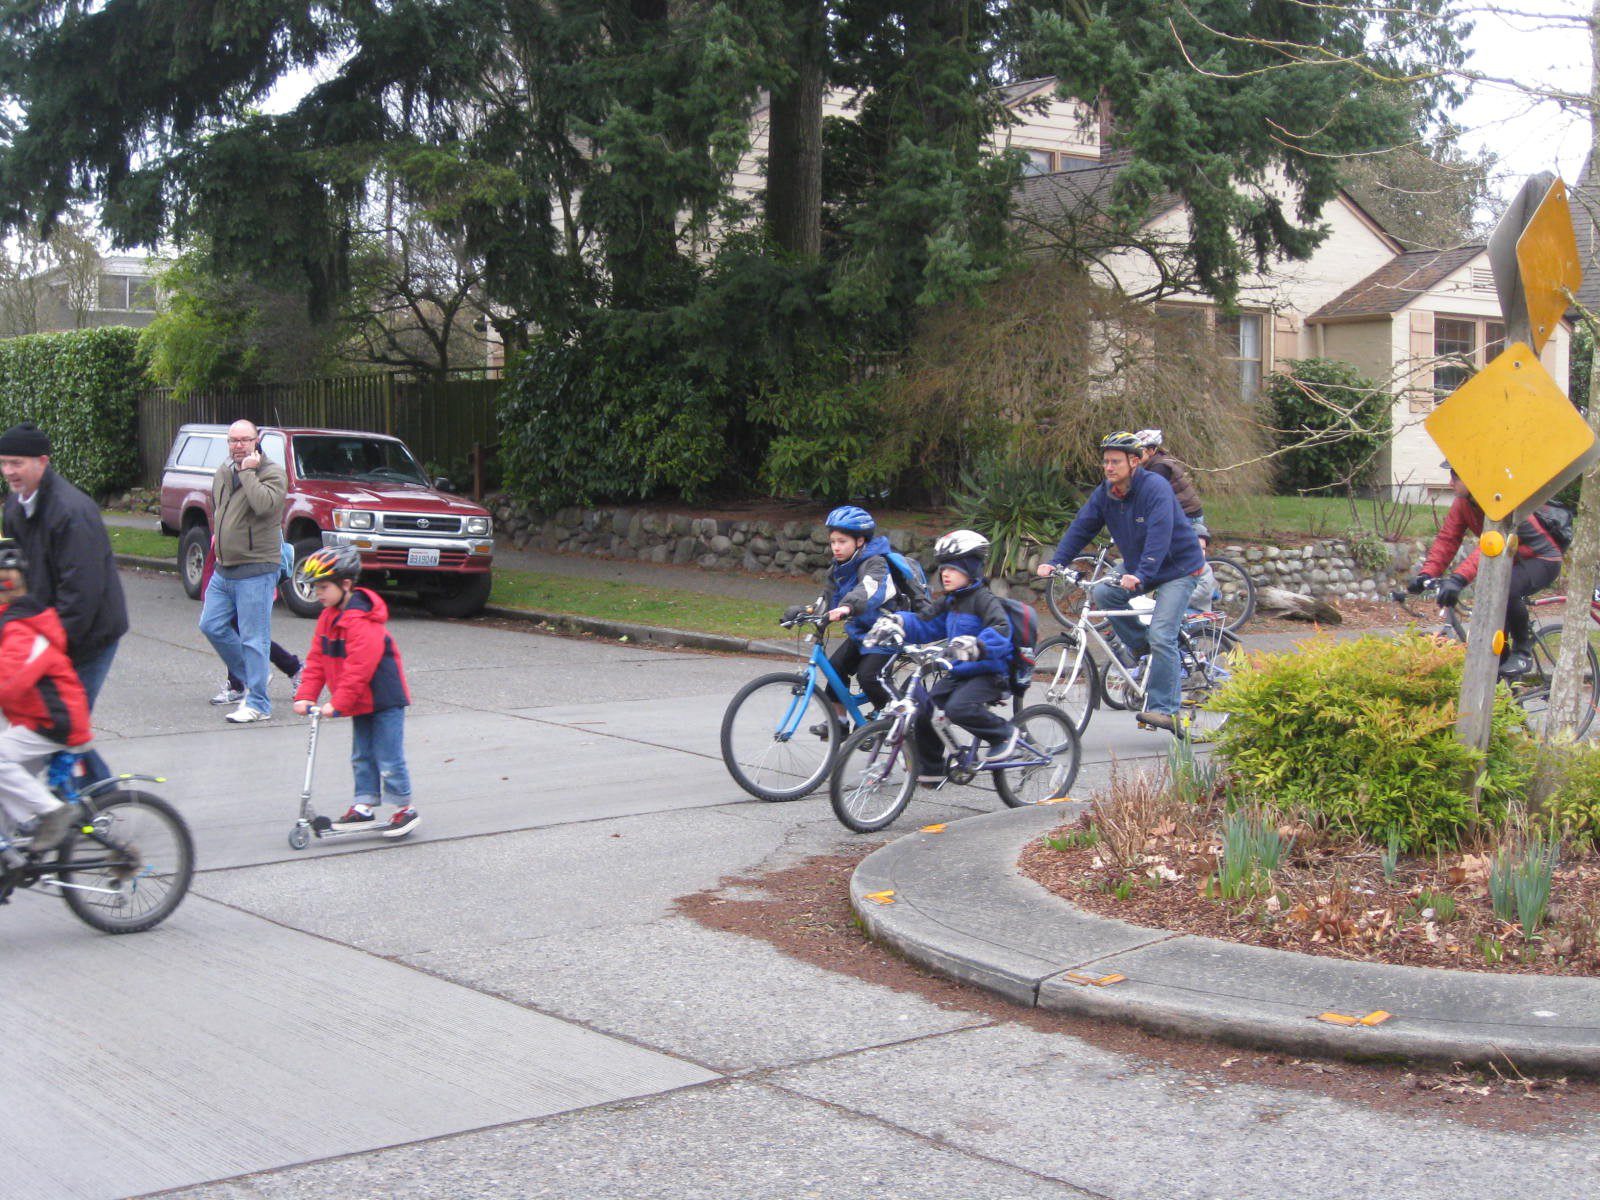 Students and parents riding their bikes to school around a traffic circle on a street.